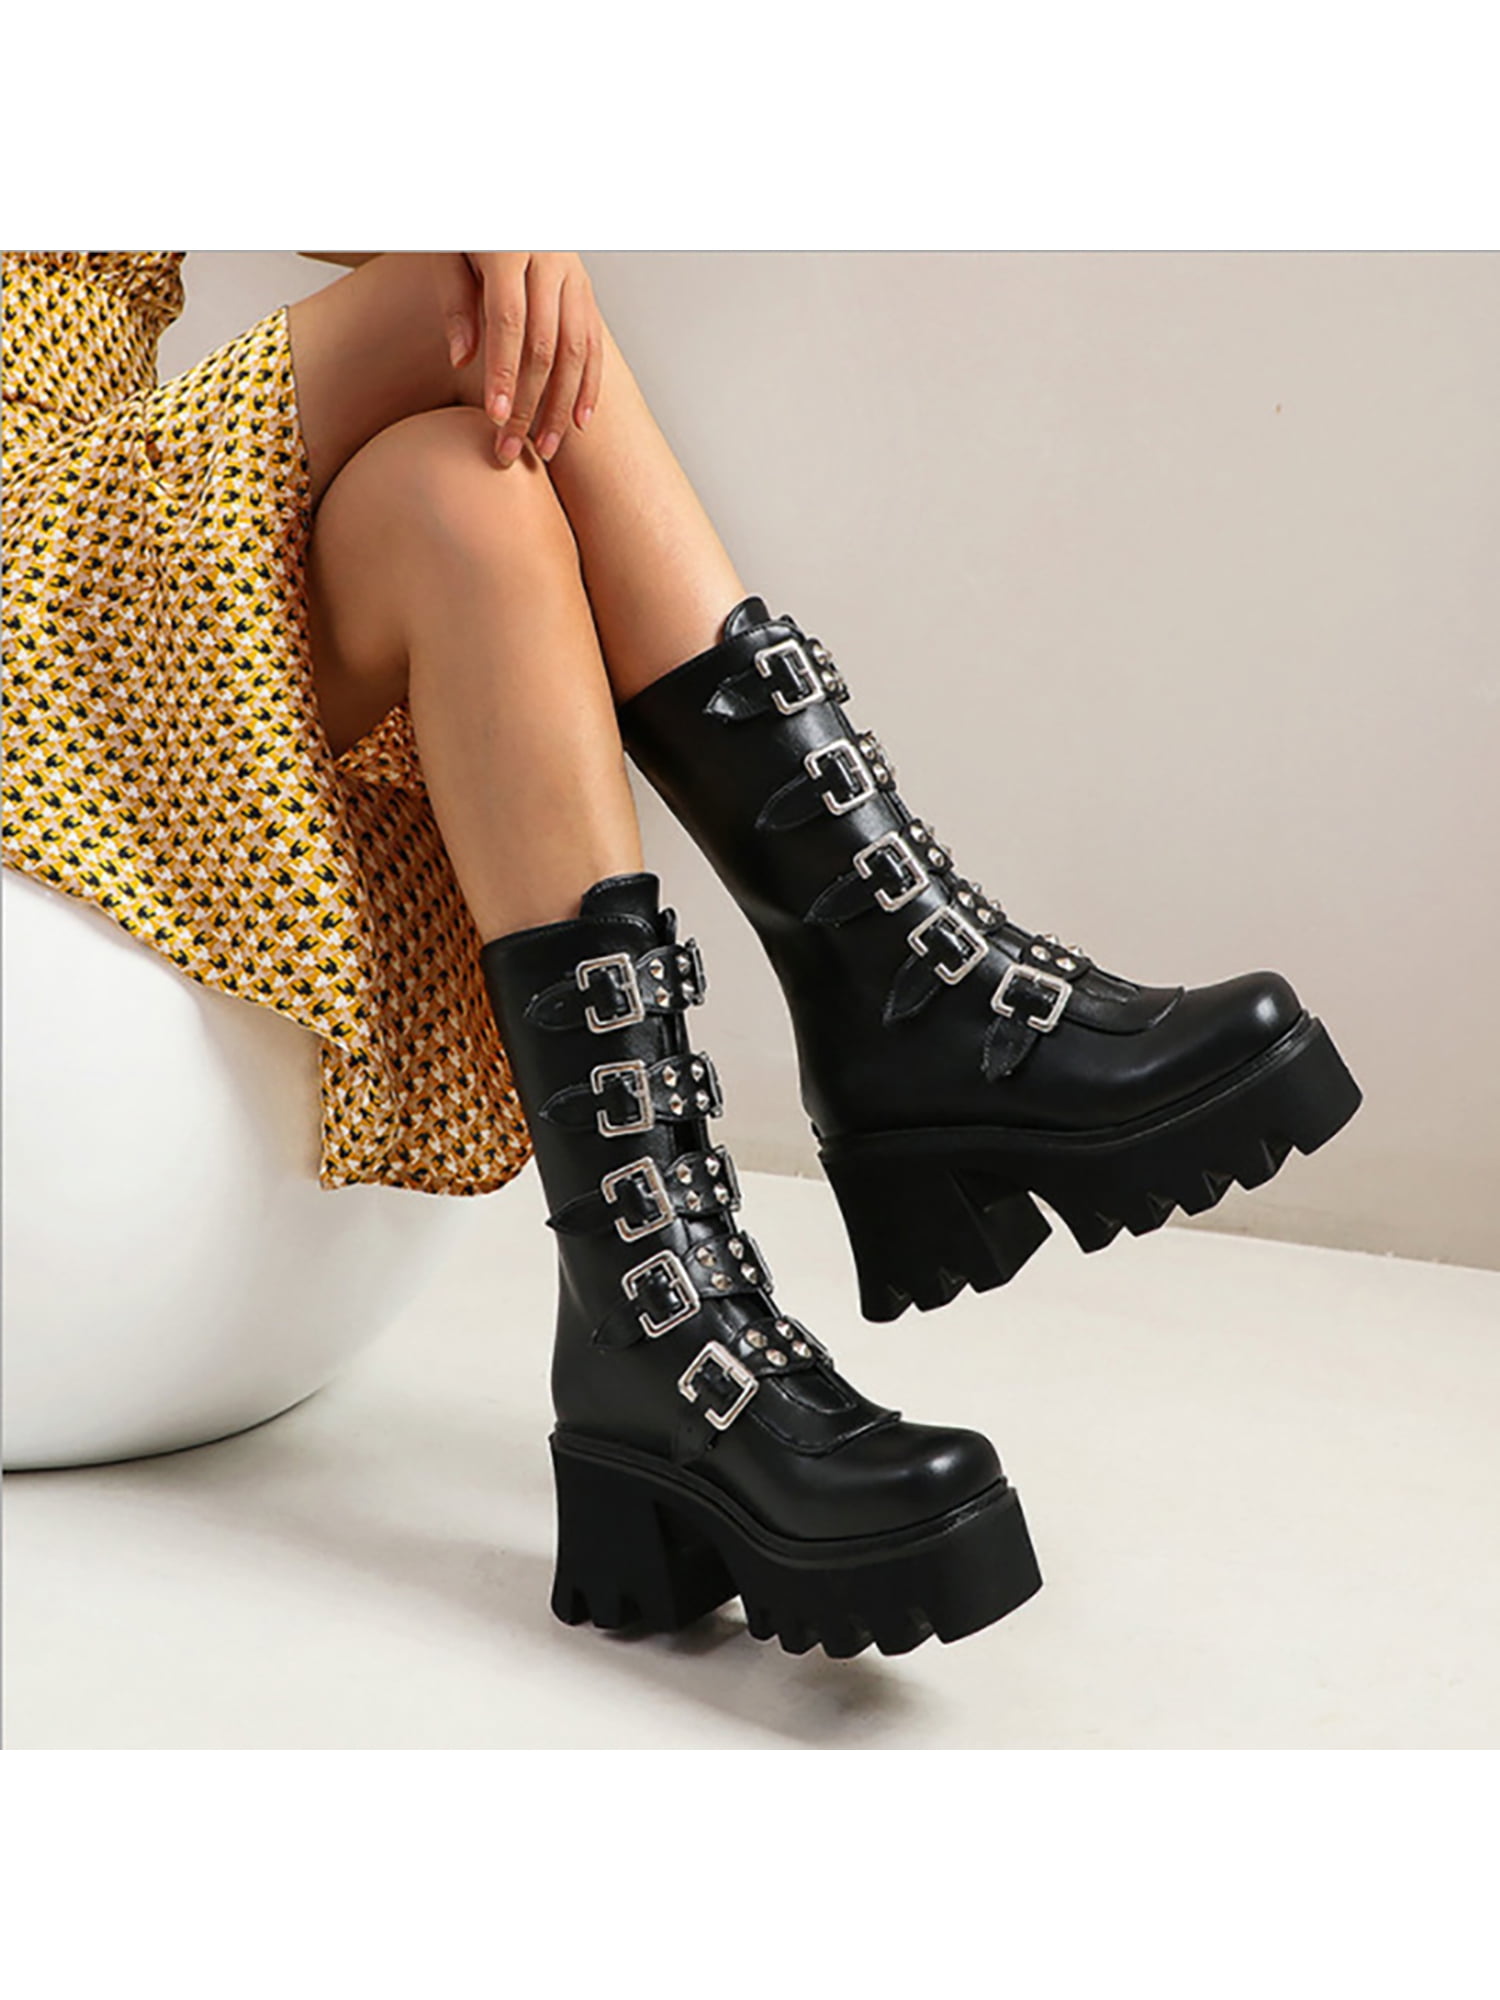 Womens High Wedge Heel Ankle Boot Platform Zipper Black Party Shoes Boots